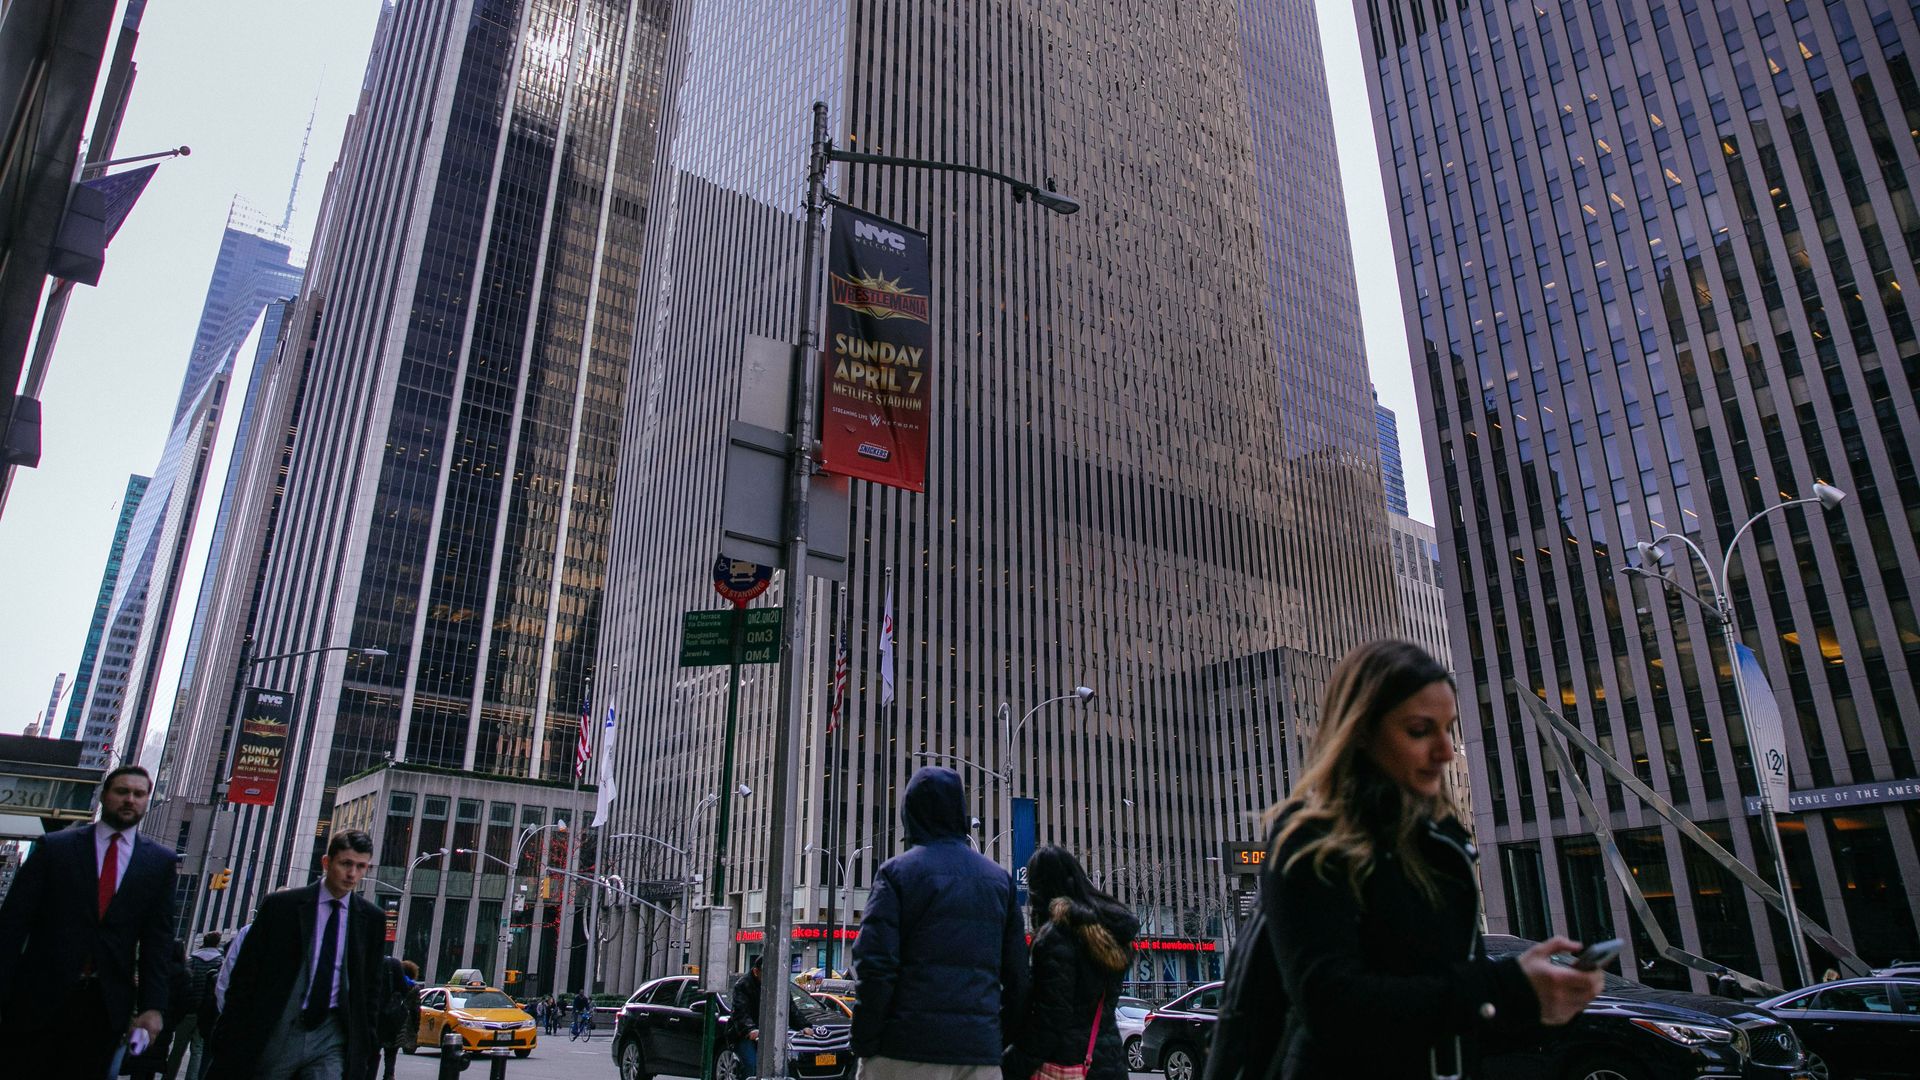 The News Corp. building on 6th Avenue, home to Fox News, the New York Post and the Wall Street Journal, on March 20, 2019 in New York City, New York